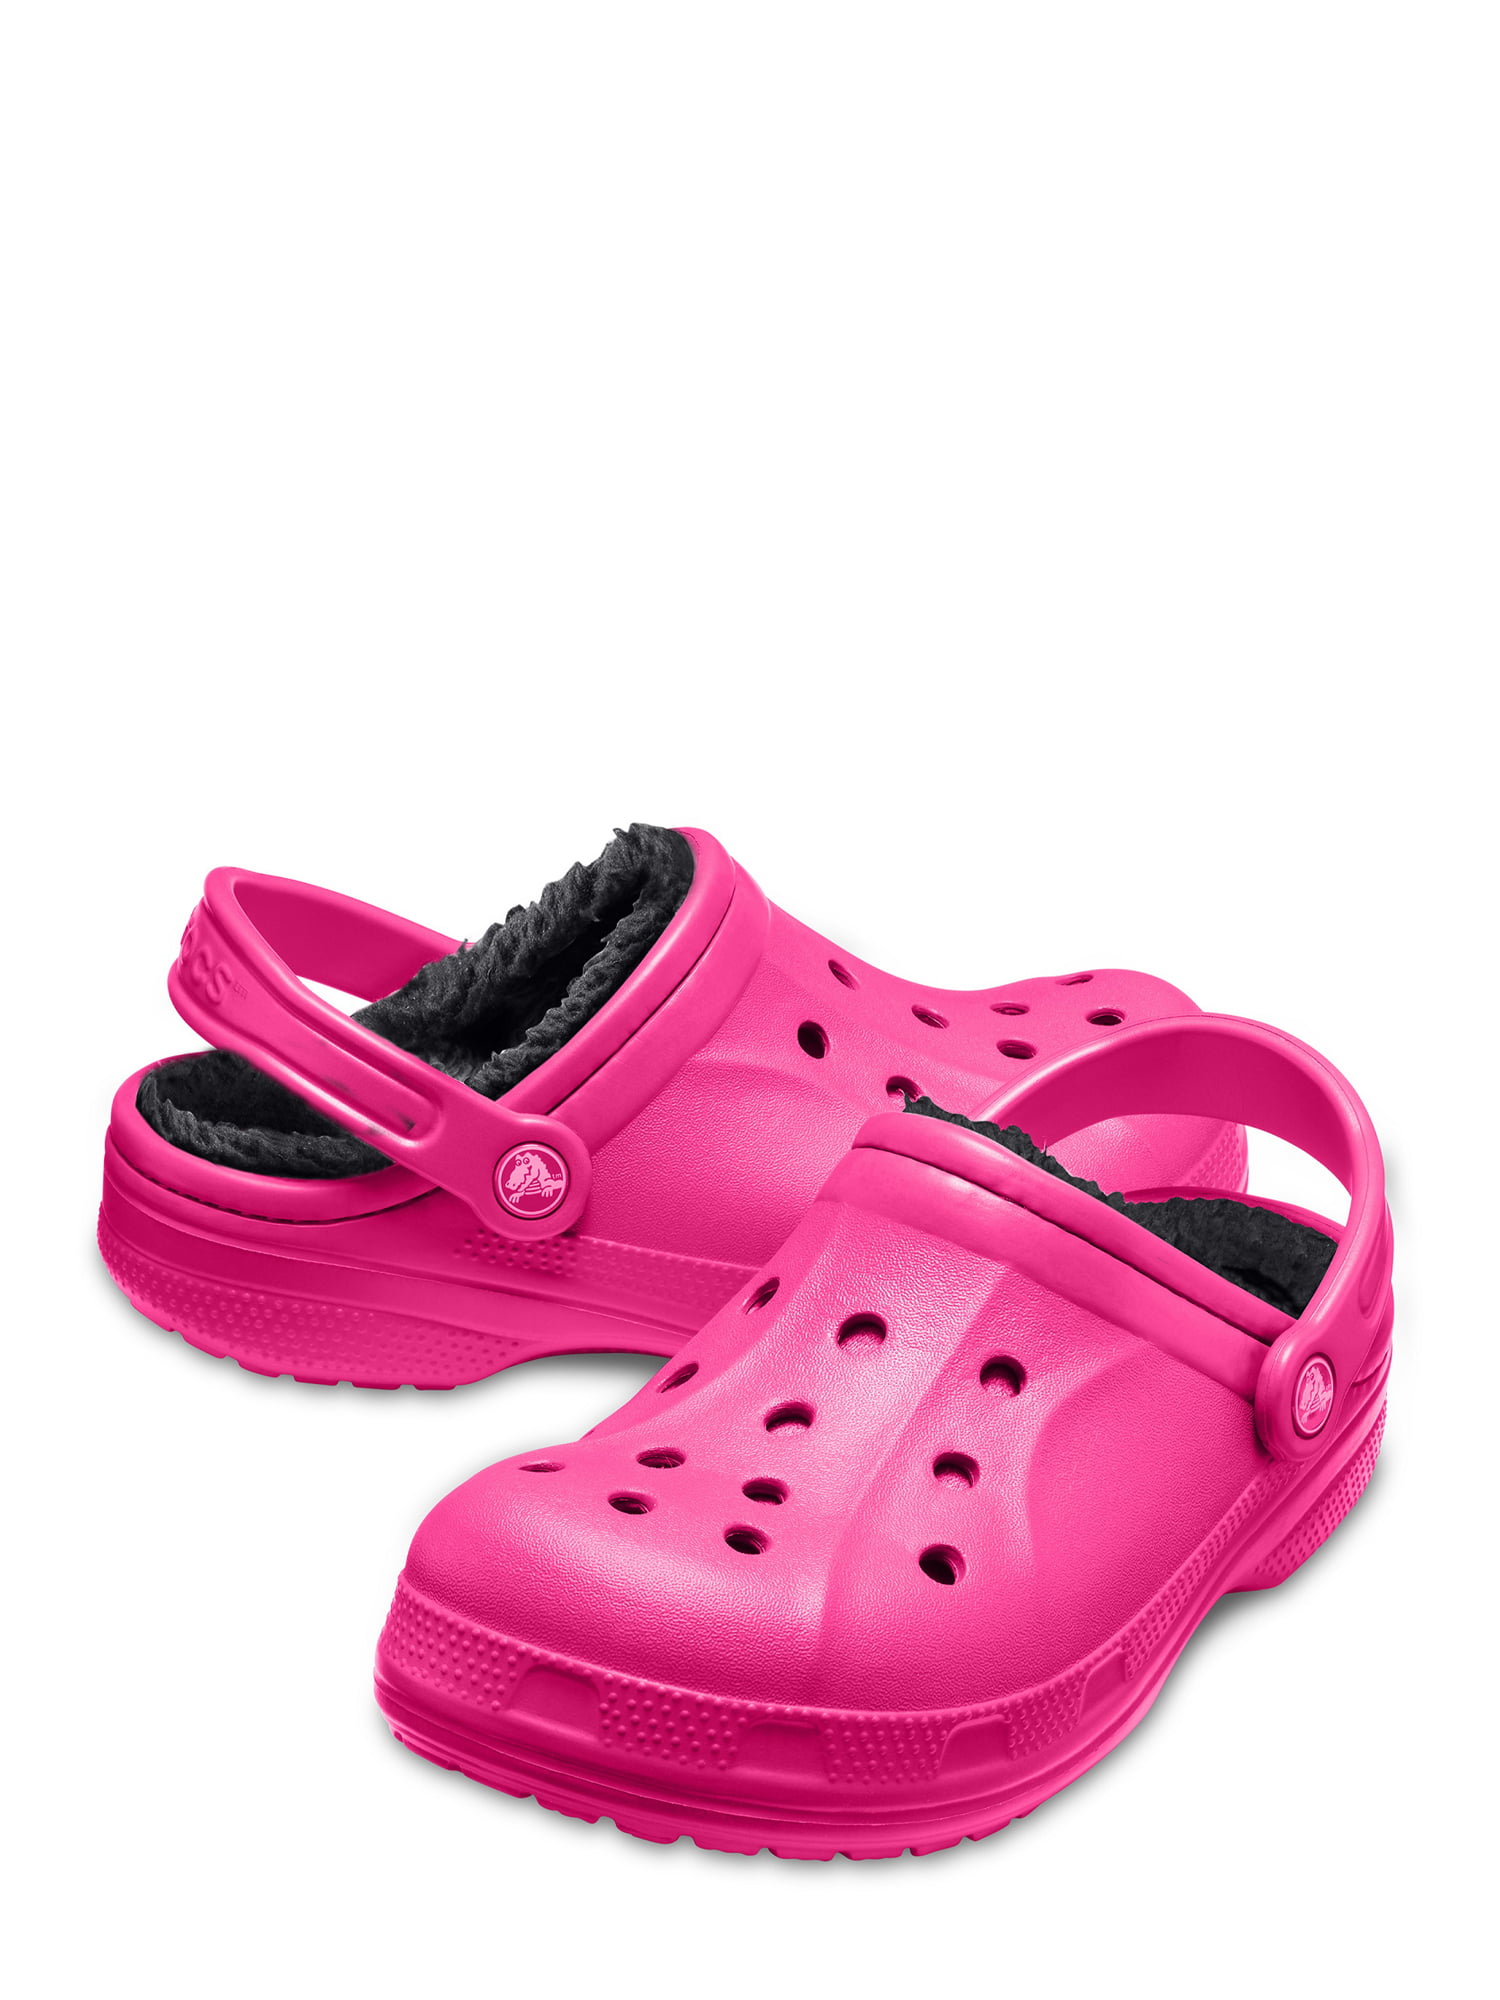 pink crocs with white fur